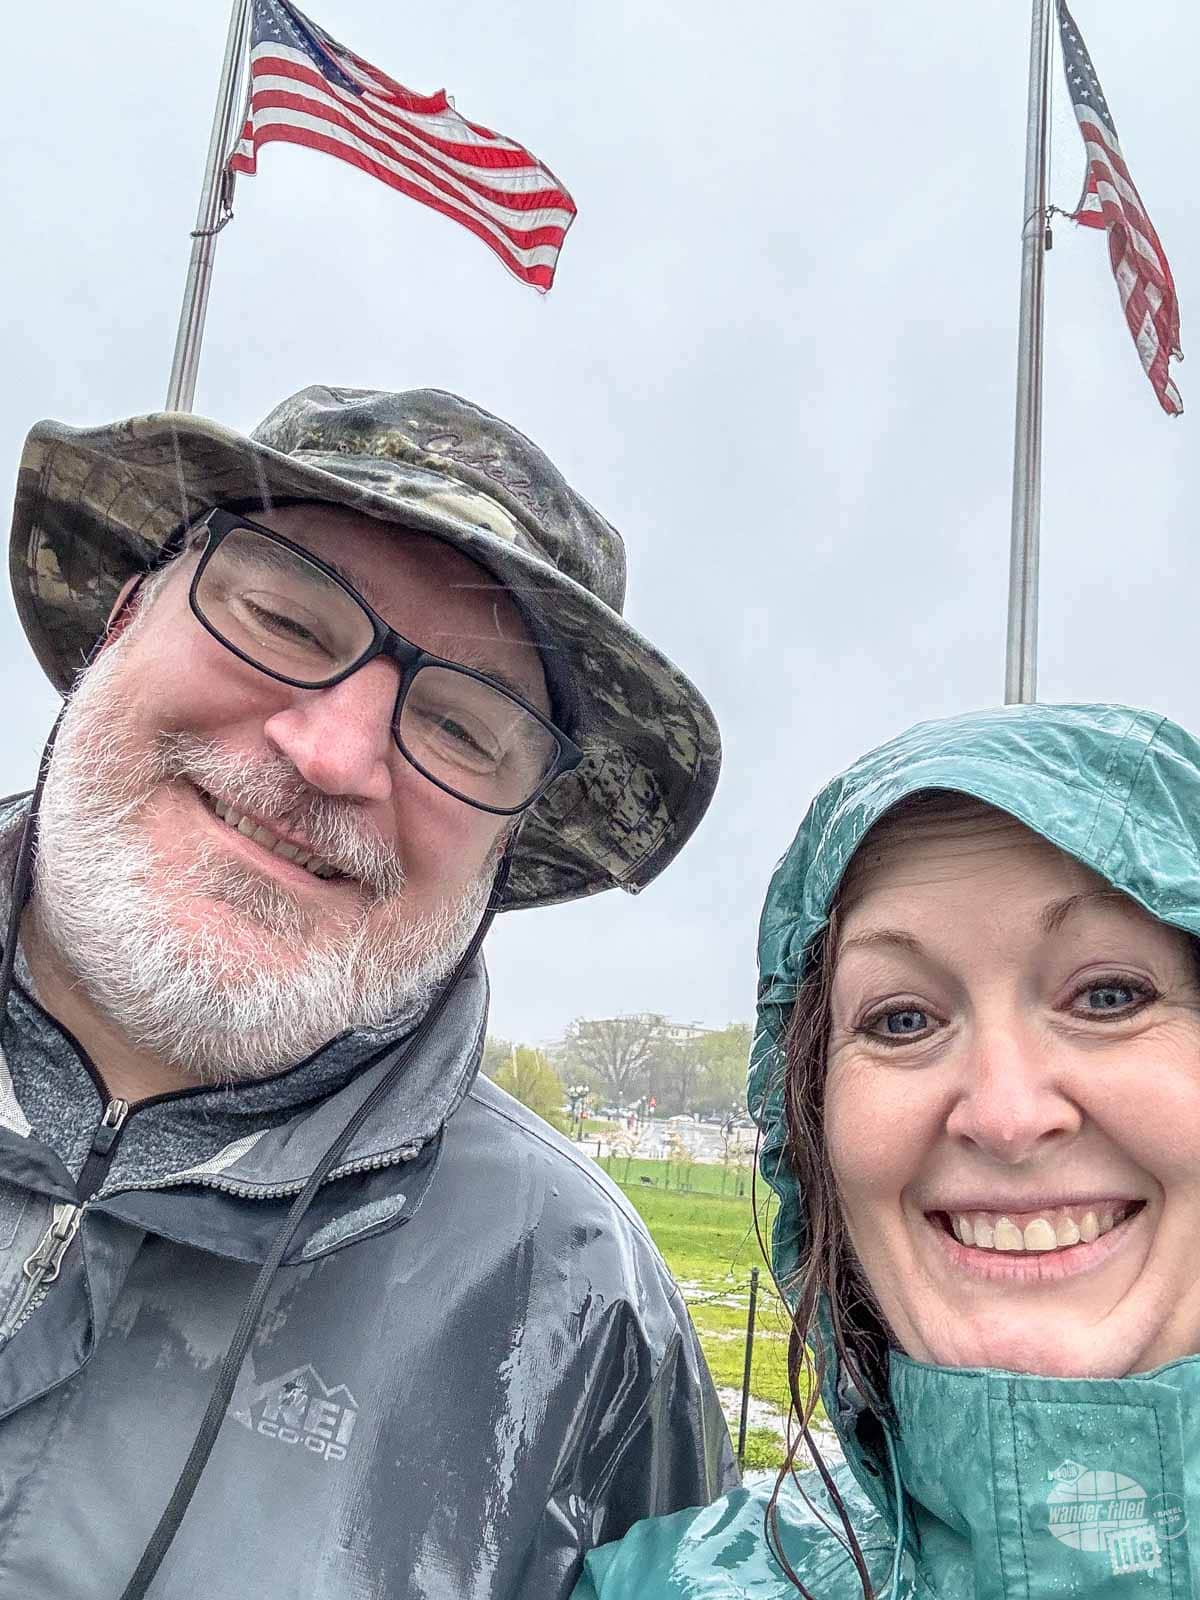 Grant and Bonnie in the pouring rain at the Washington Monument